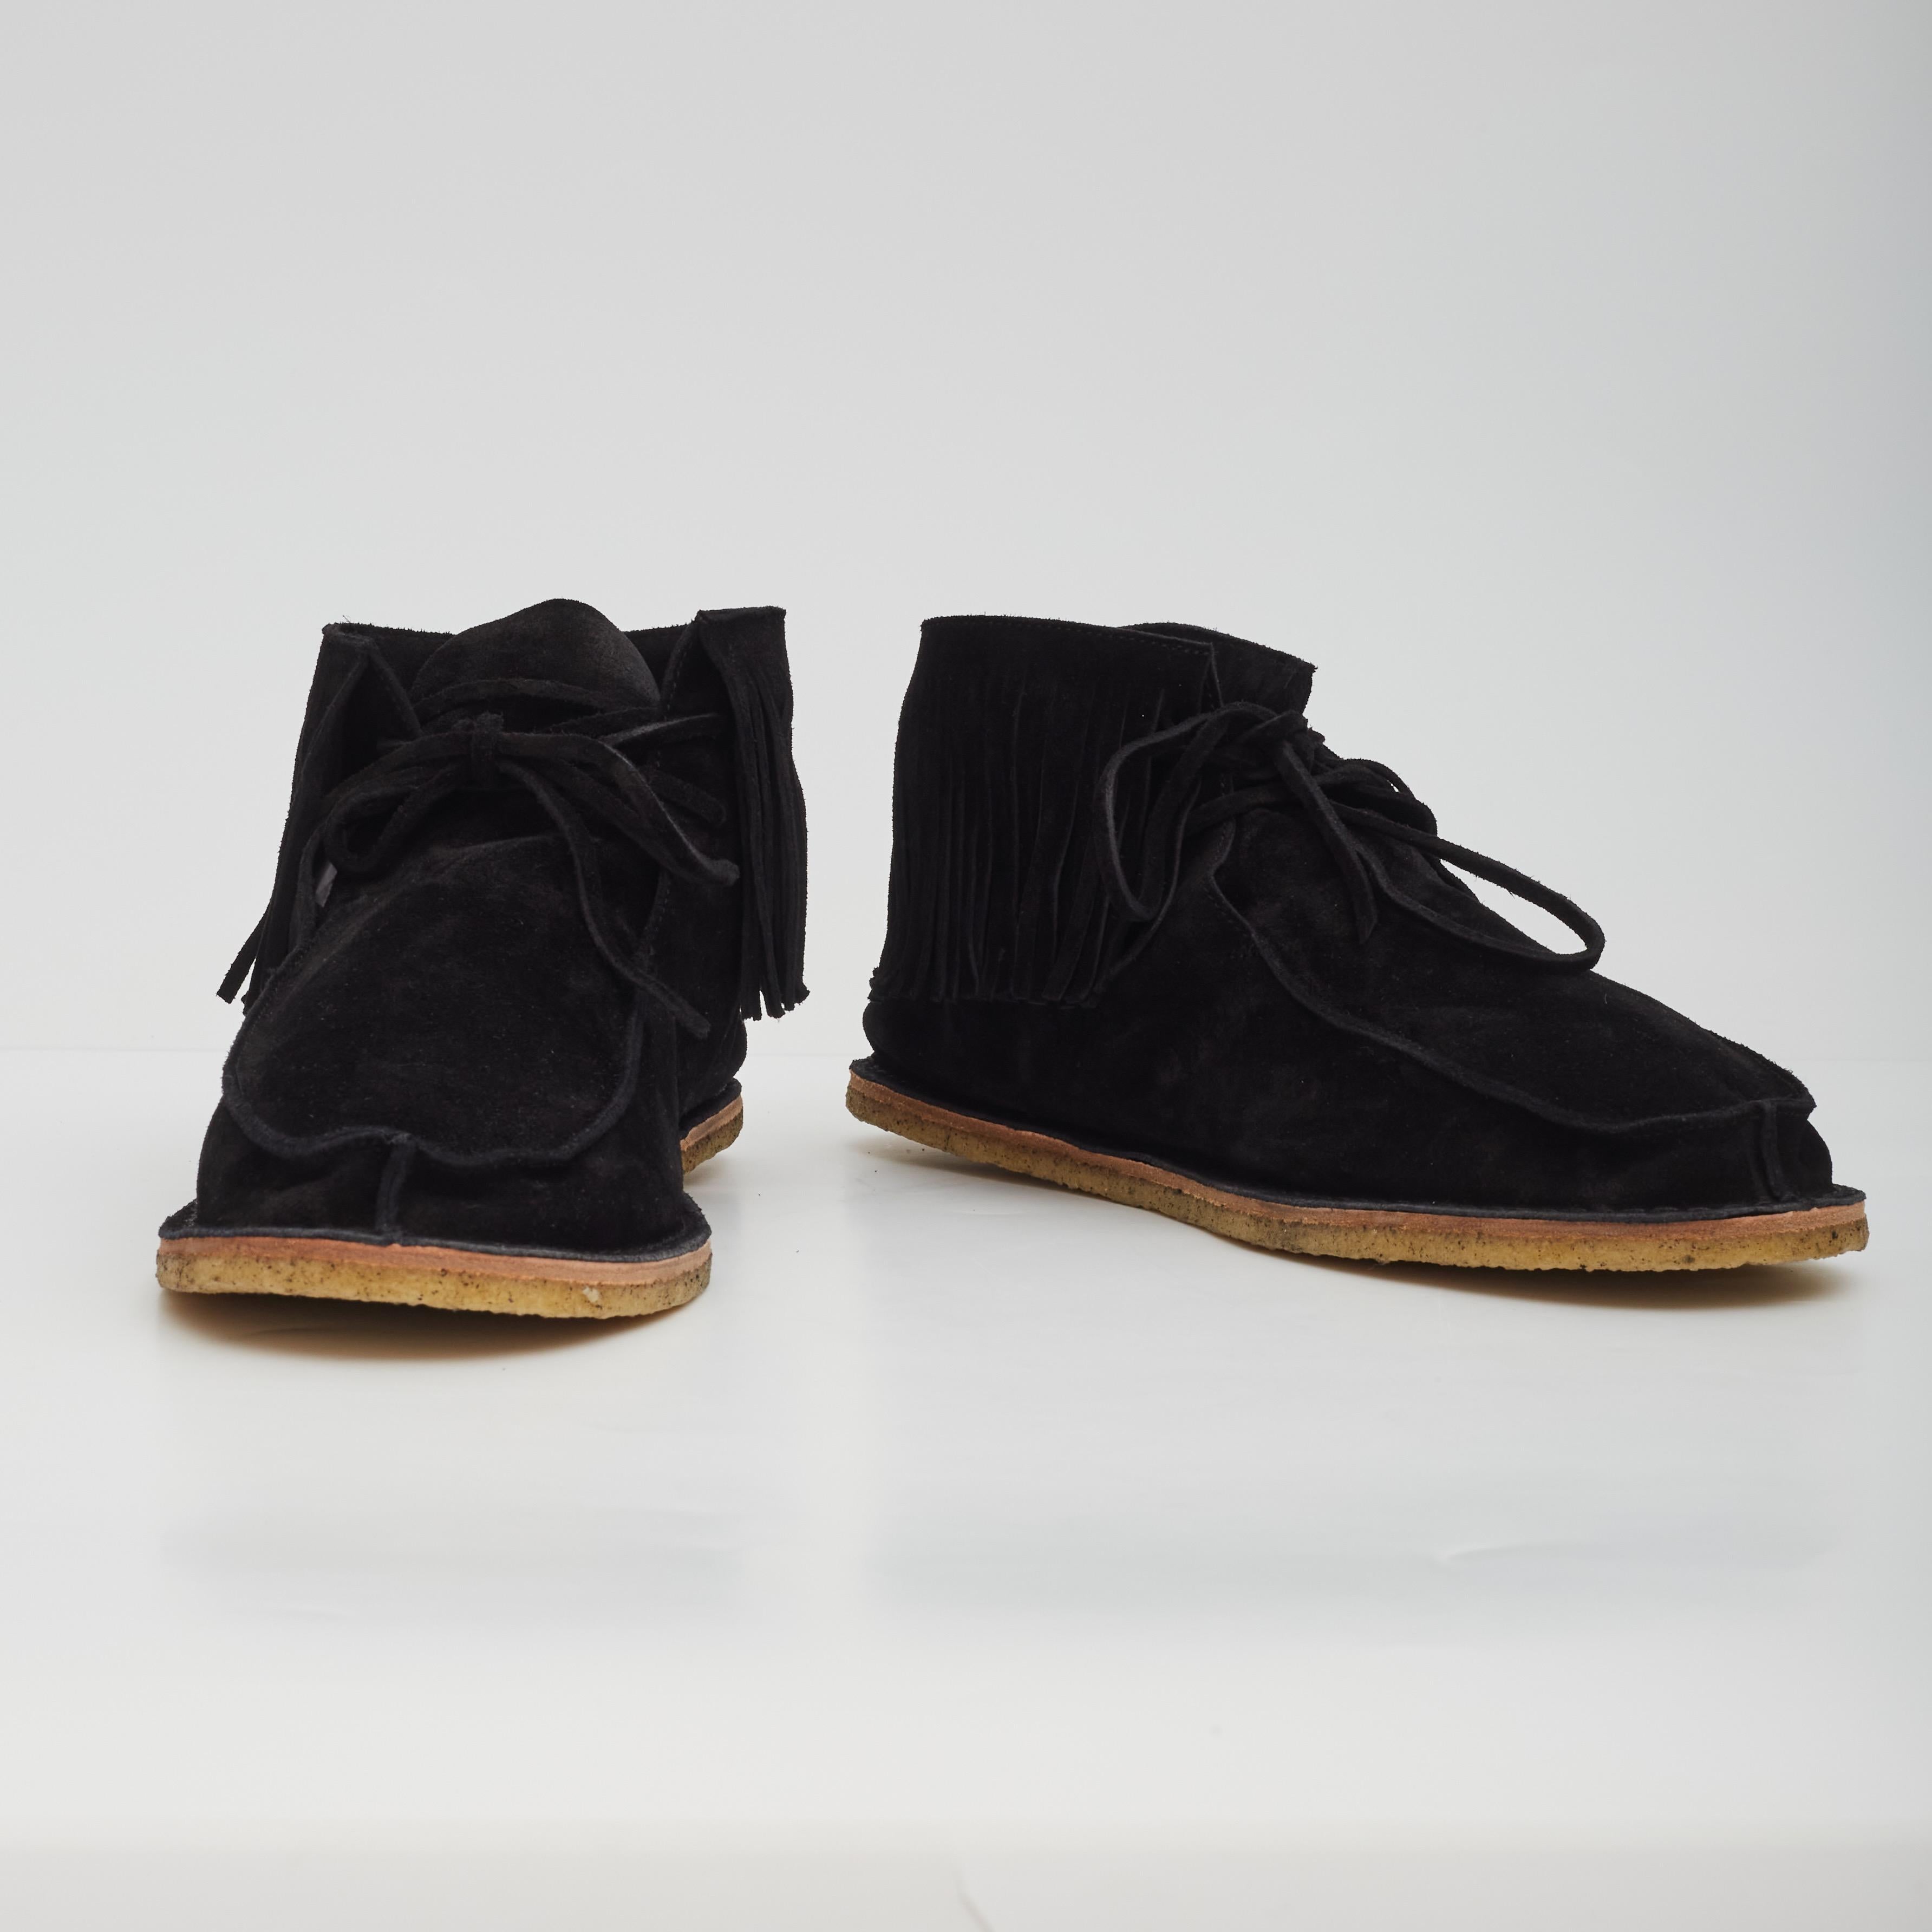 Saint Laurent Fringed Suede Black Desert Booties (43  US10 Mens) In Excellent Condition For Sale In Montreal, Quebec